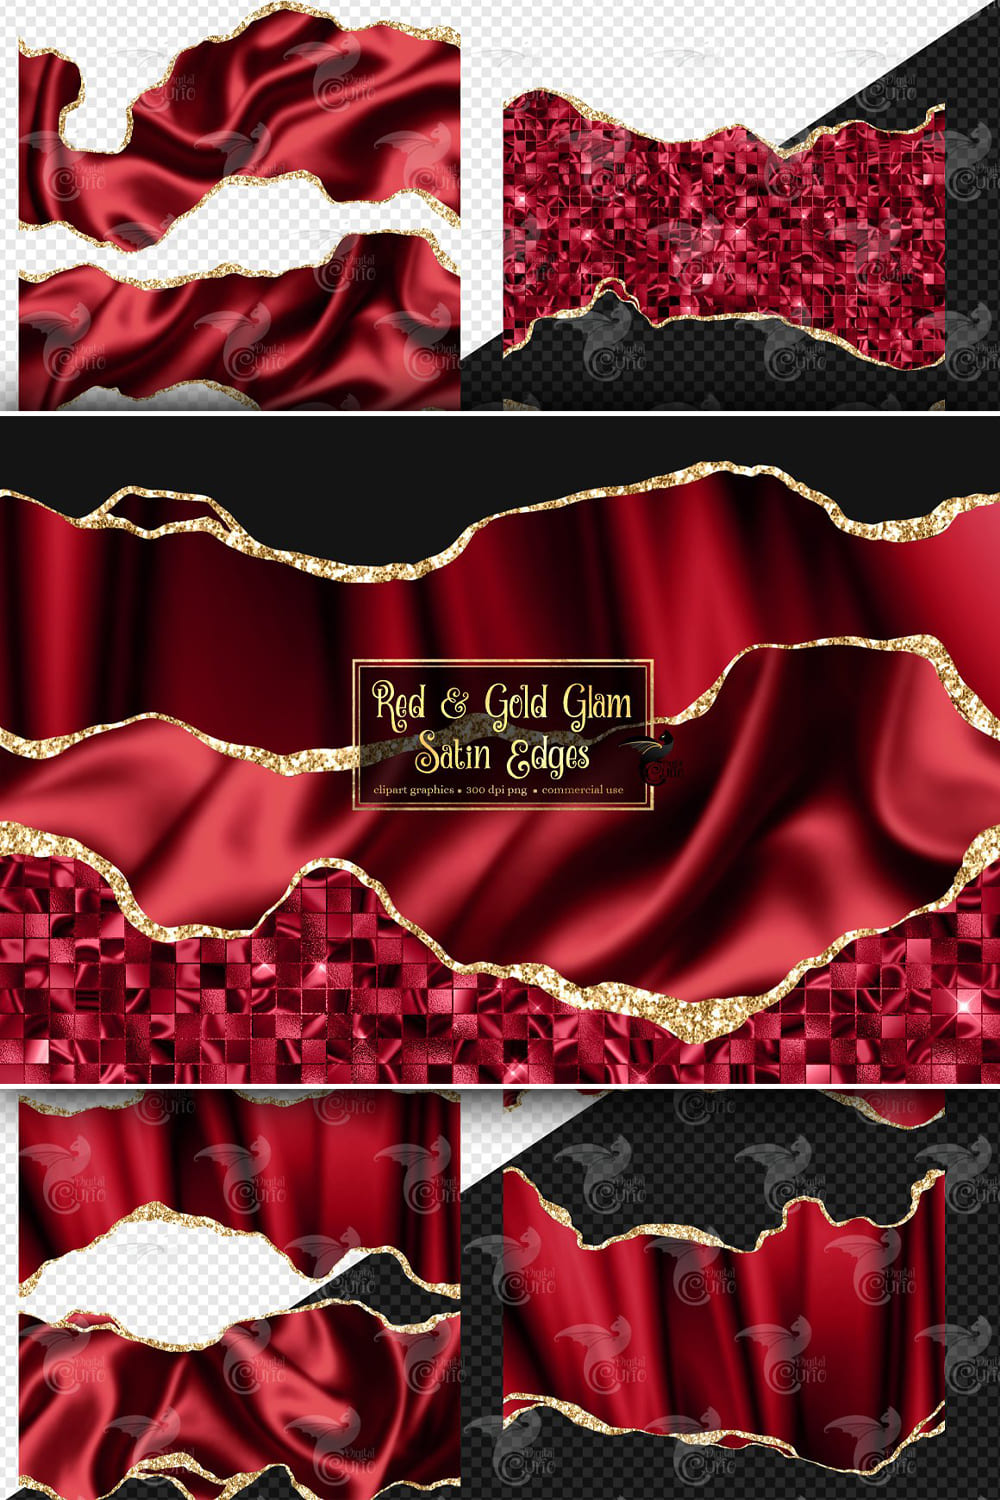 Red and gold glam satin edges - pinterest image preview.